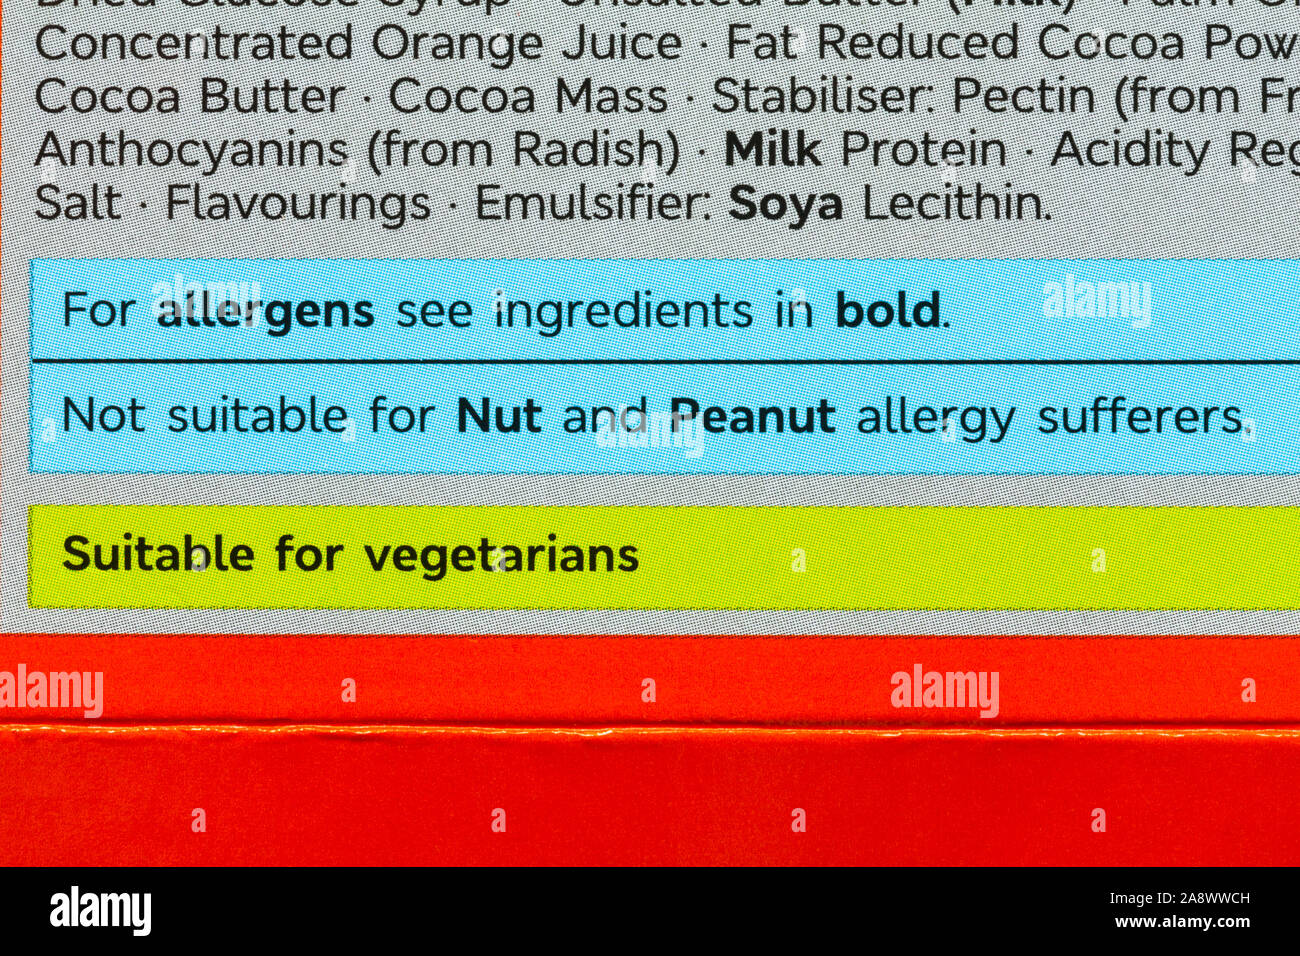 Suitable for vegetarians, not suitable for nut and peanut allergy sufferers, for allergens see ingredients in bold - information on food packaging Stock Photo